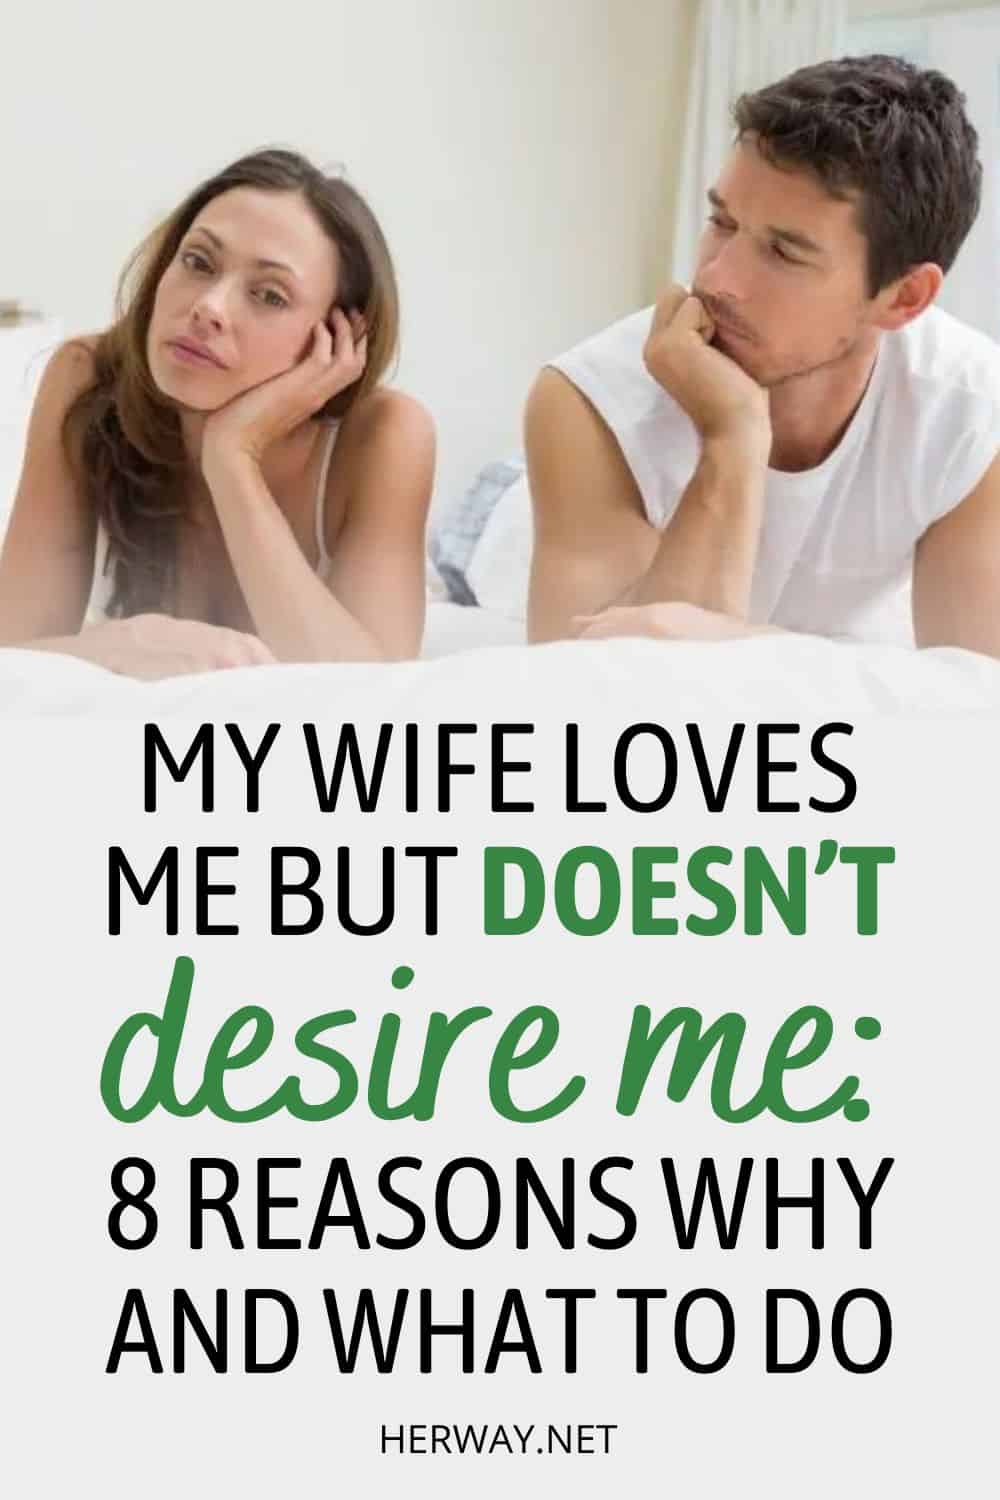 My Wife Loves Me But Doesn’t Desire Me 8 Reasons Why And What To Do Pinterest